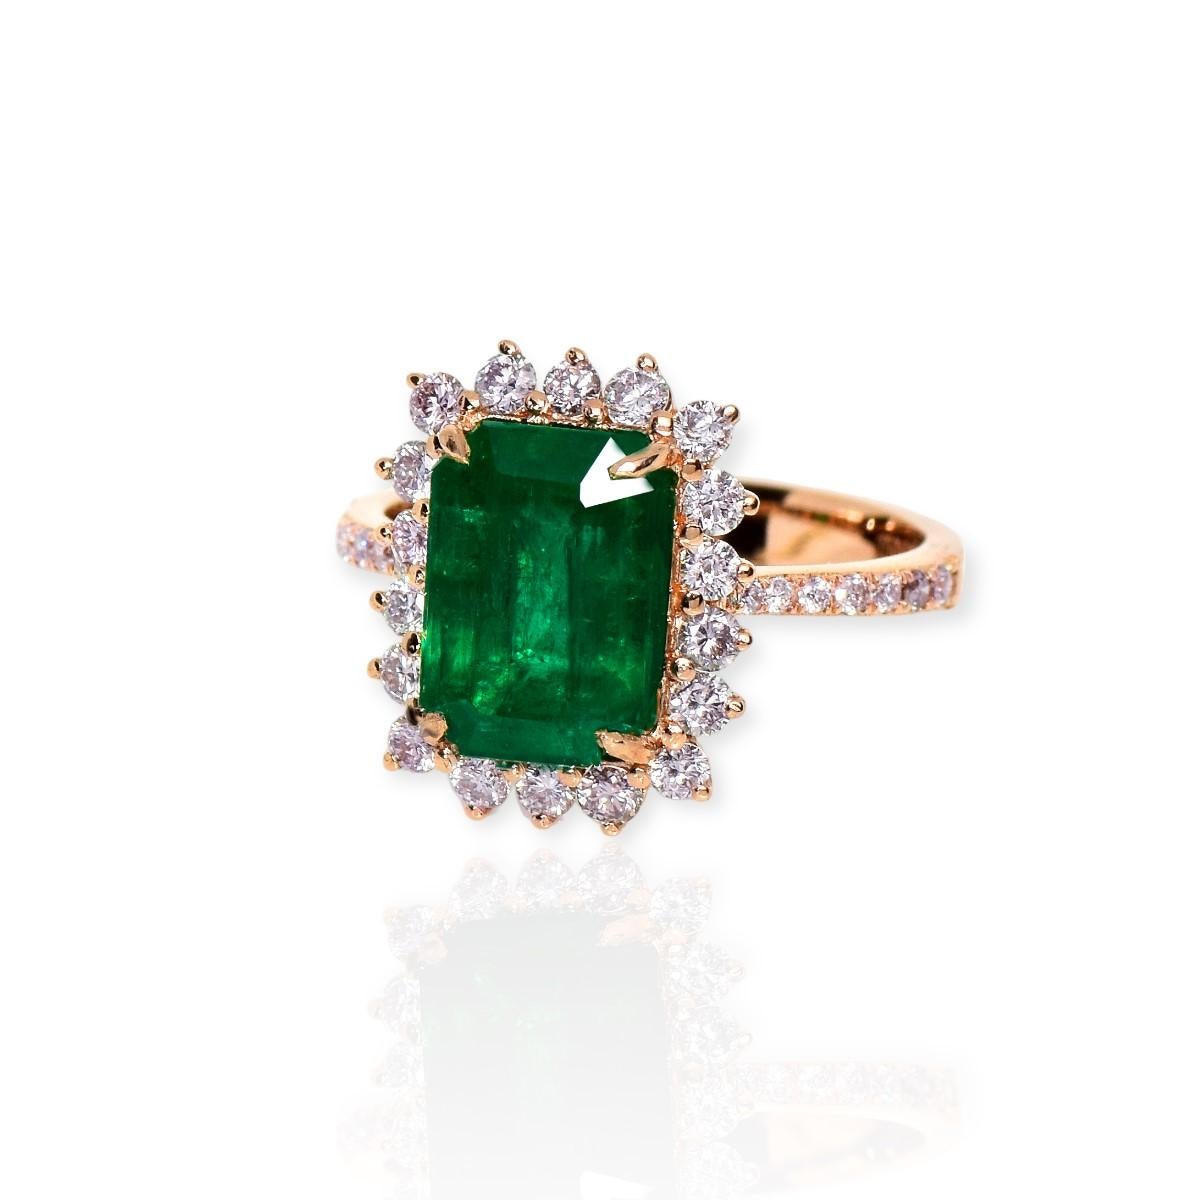 IGI 18K 3.26 ct Natural Green Emerald&Pink Diamond Art Deco Engagement Ring In New Condition For Sale In Kaohsiung City, TW